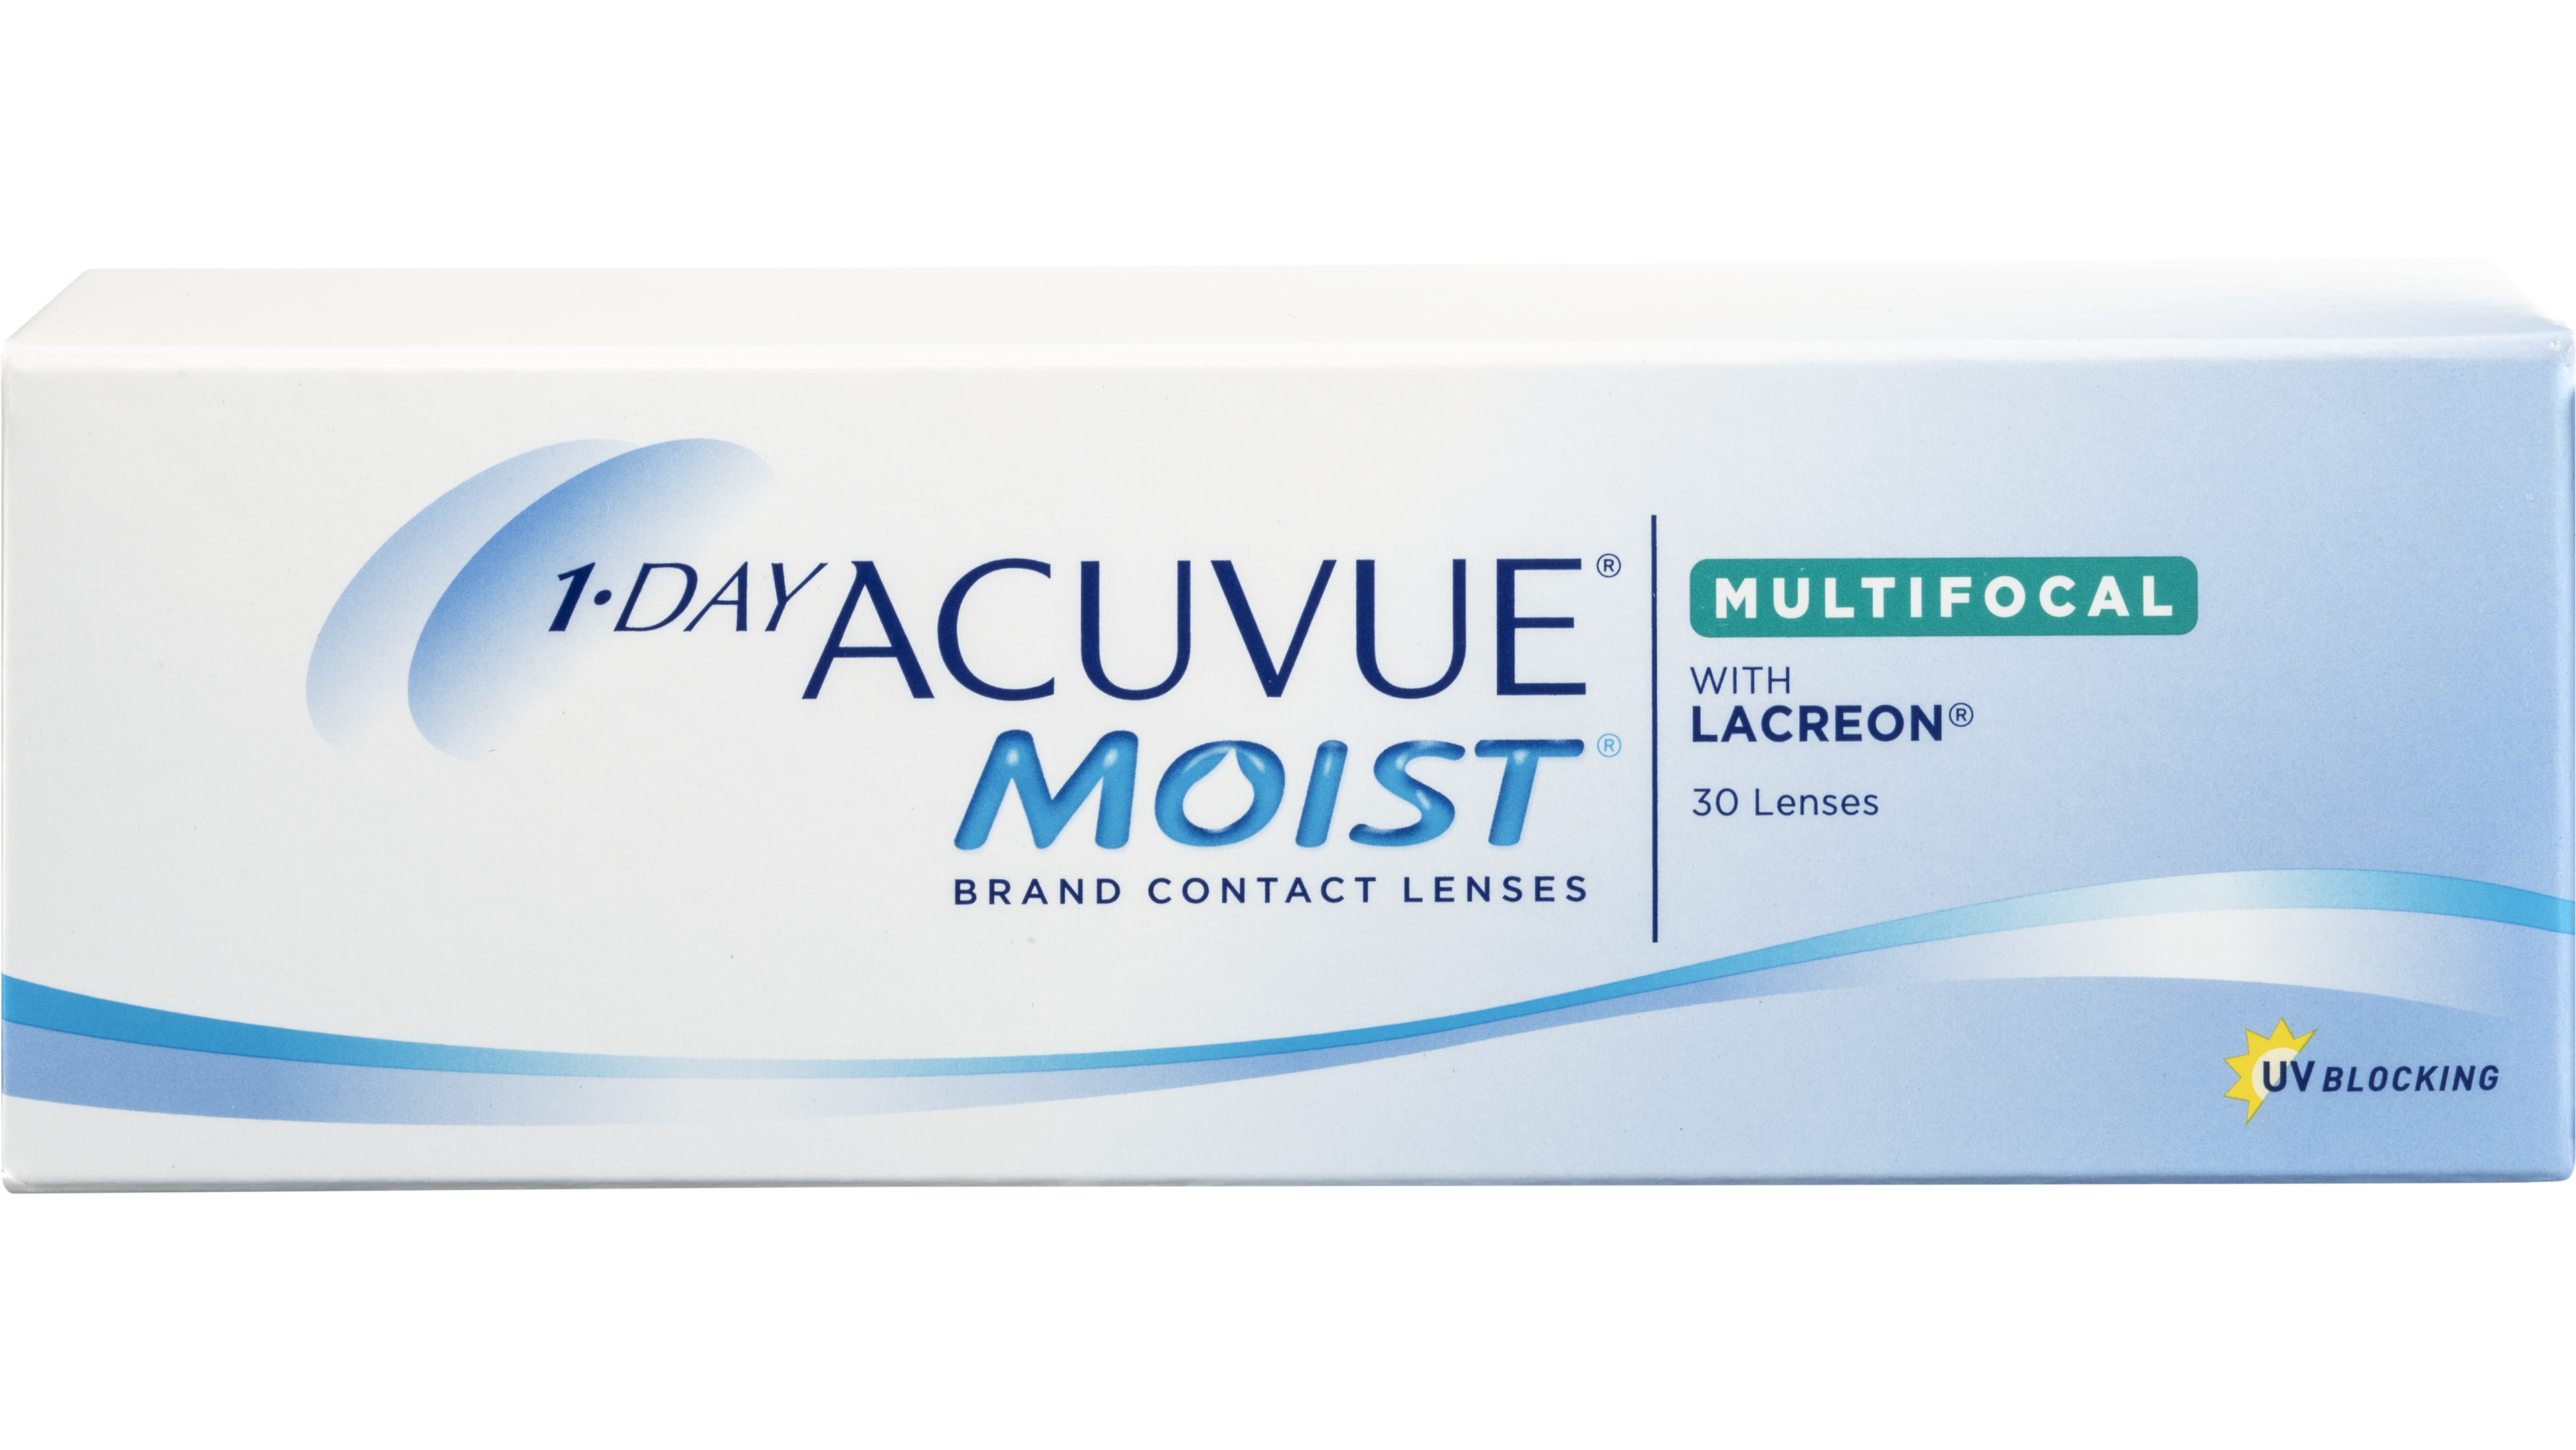 Front 1 Day Acuvue Moist Multifocaal